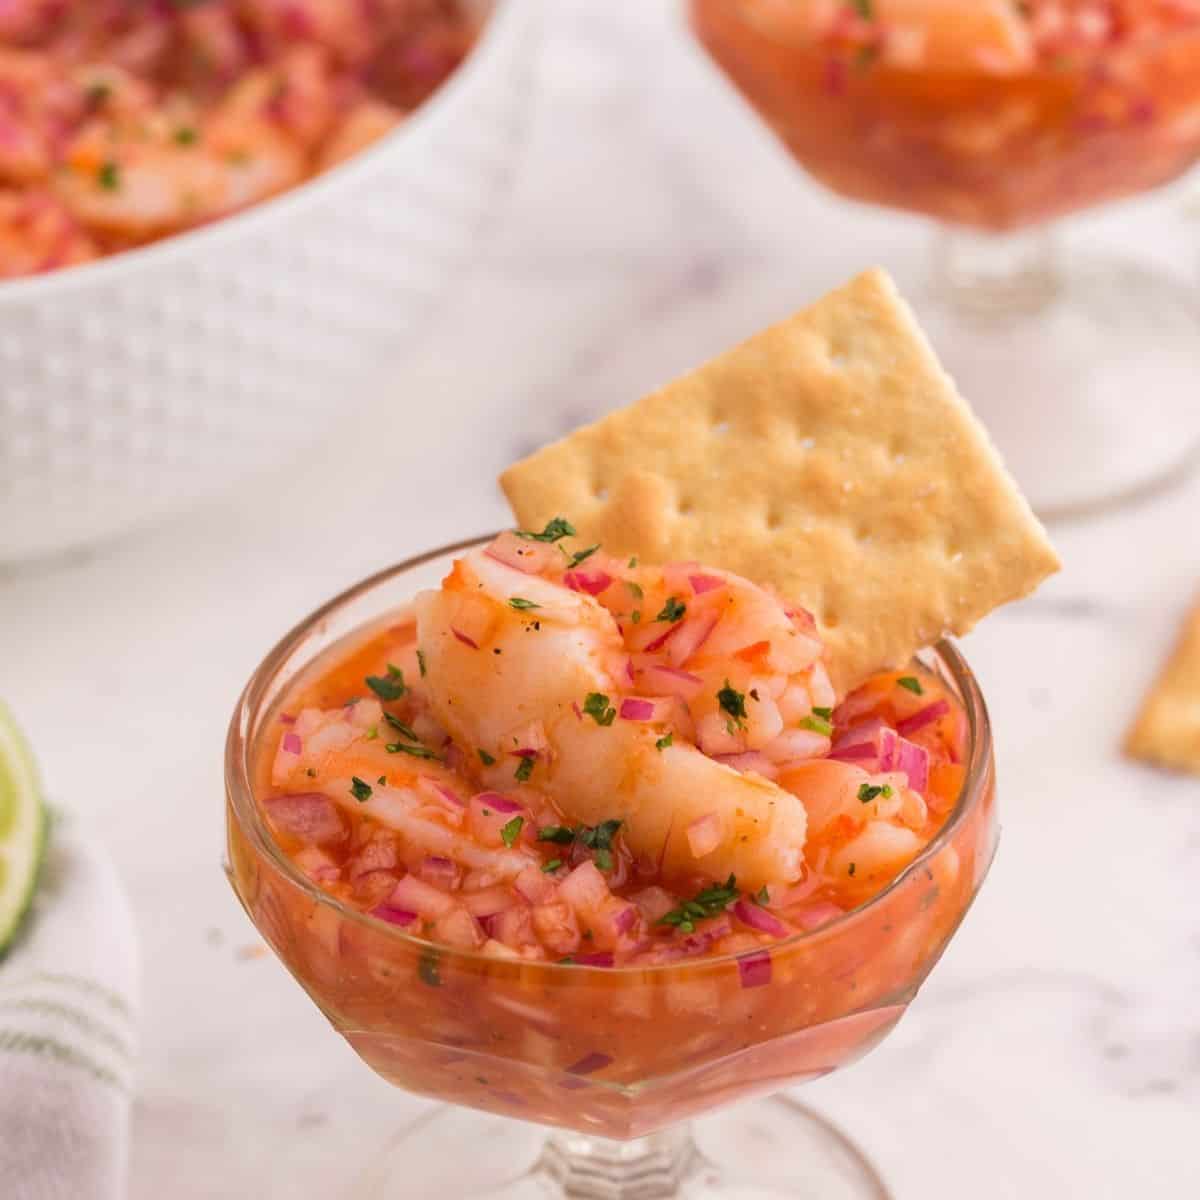 small cup with ceviche